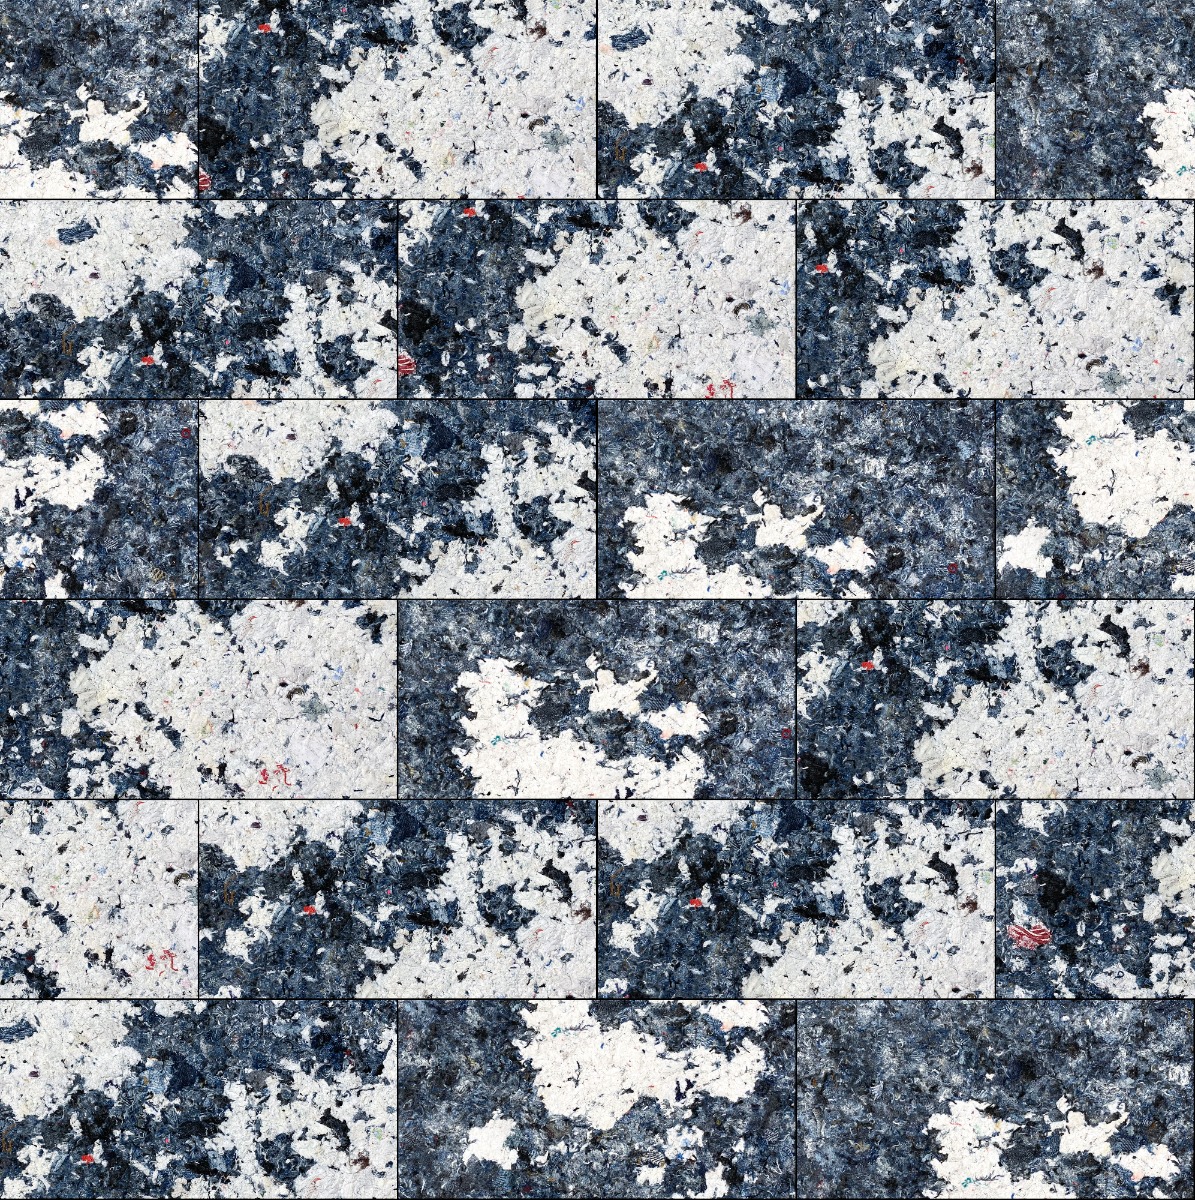 A seamless brick texture with blue jean marble brick units arranged in a Stretcher pattern